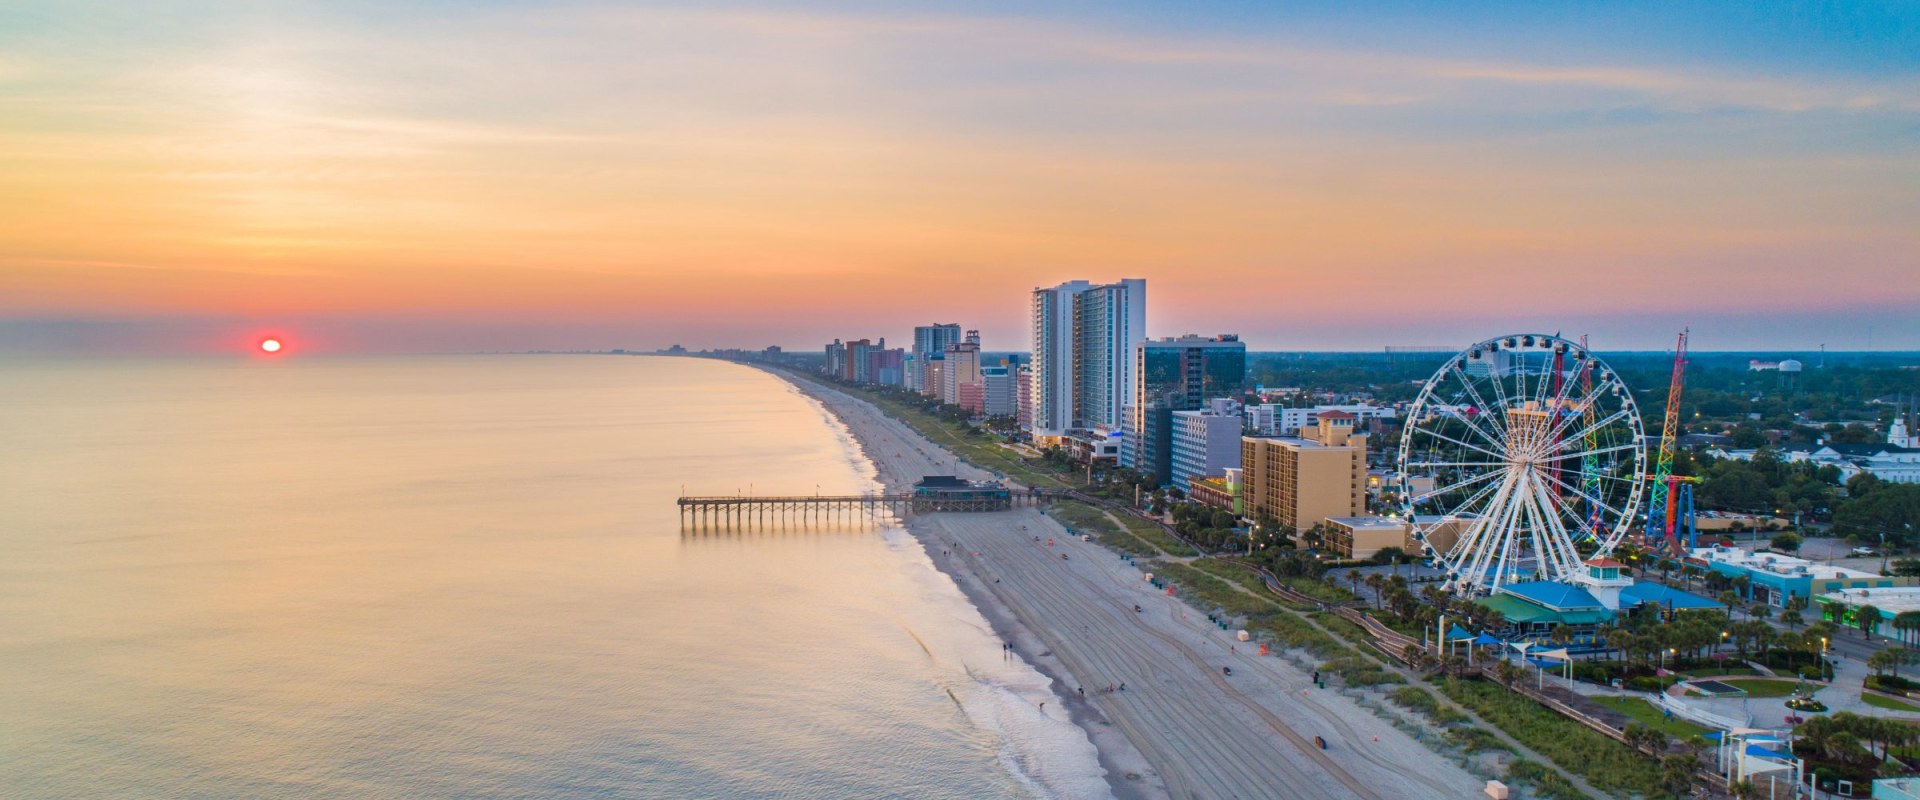 The Best Things to Do with Kids in Myrtle Beach